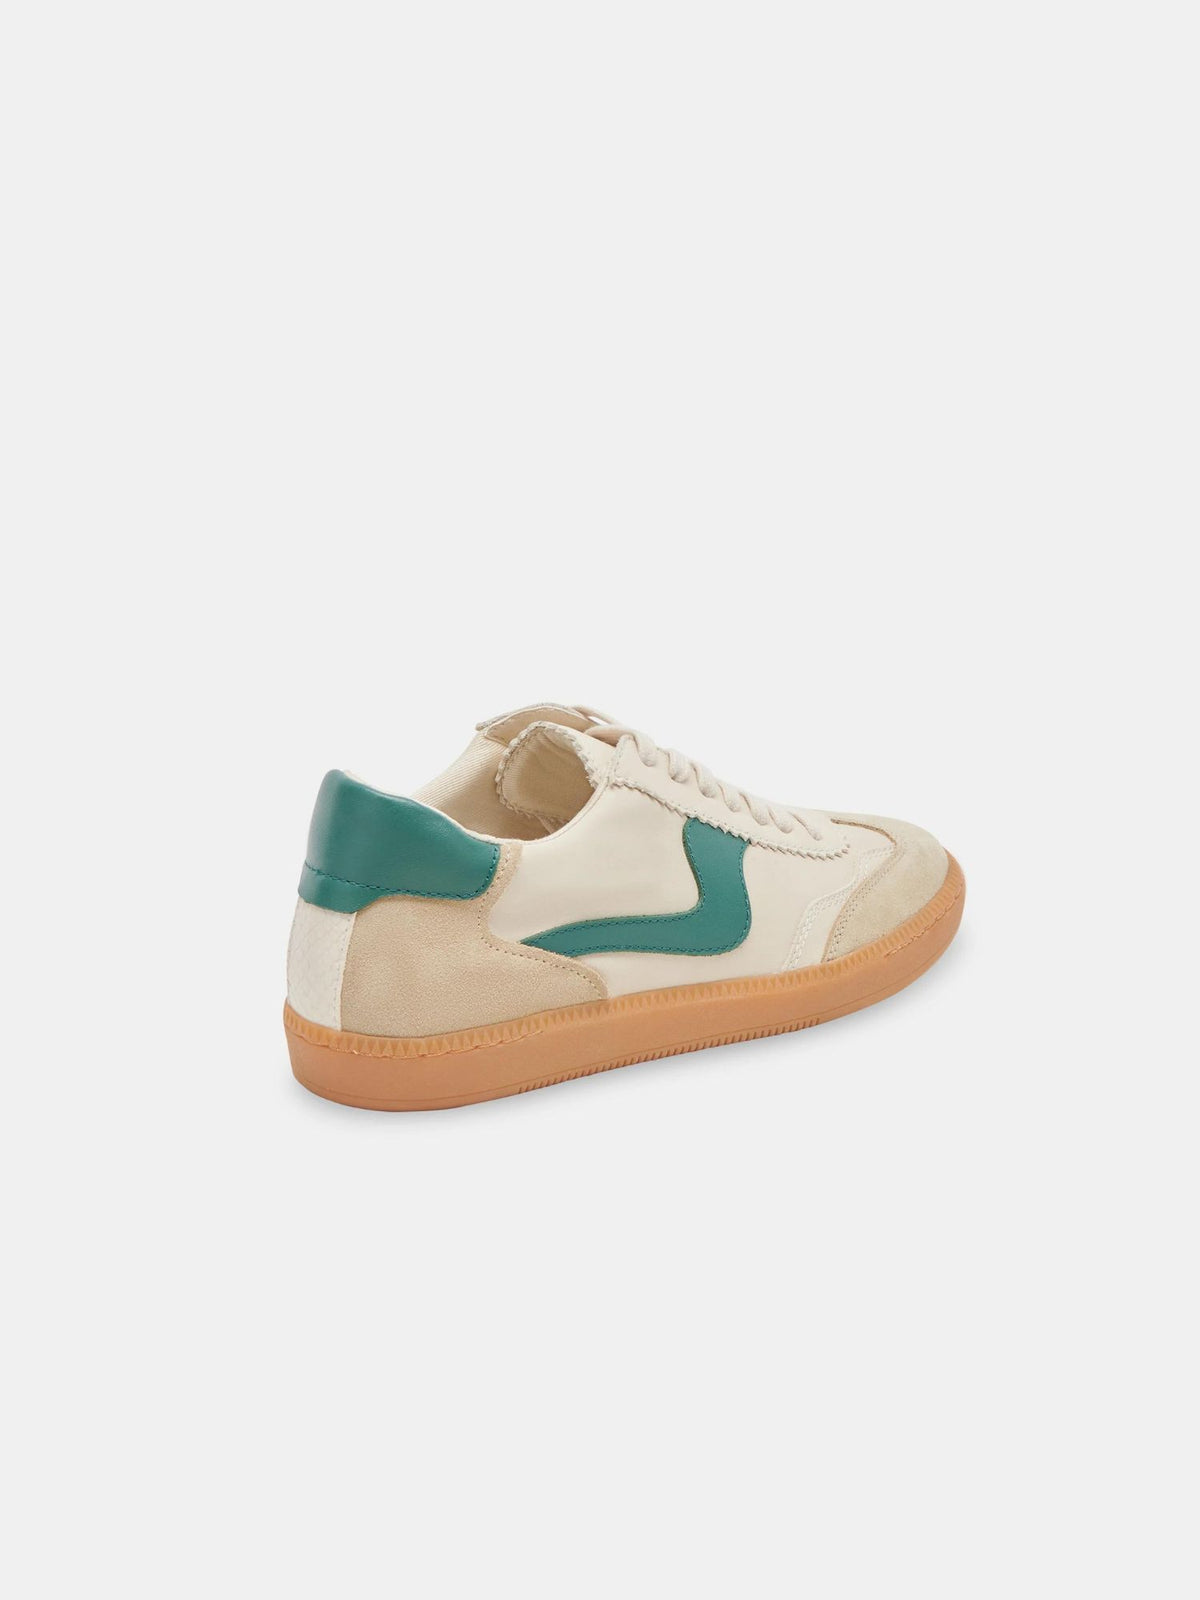 dole vita leather notice sneakers in white and green-angled